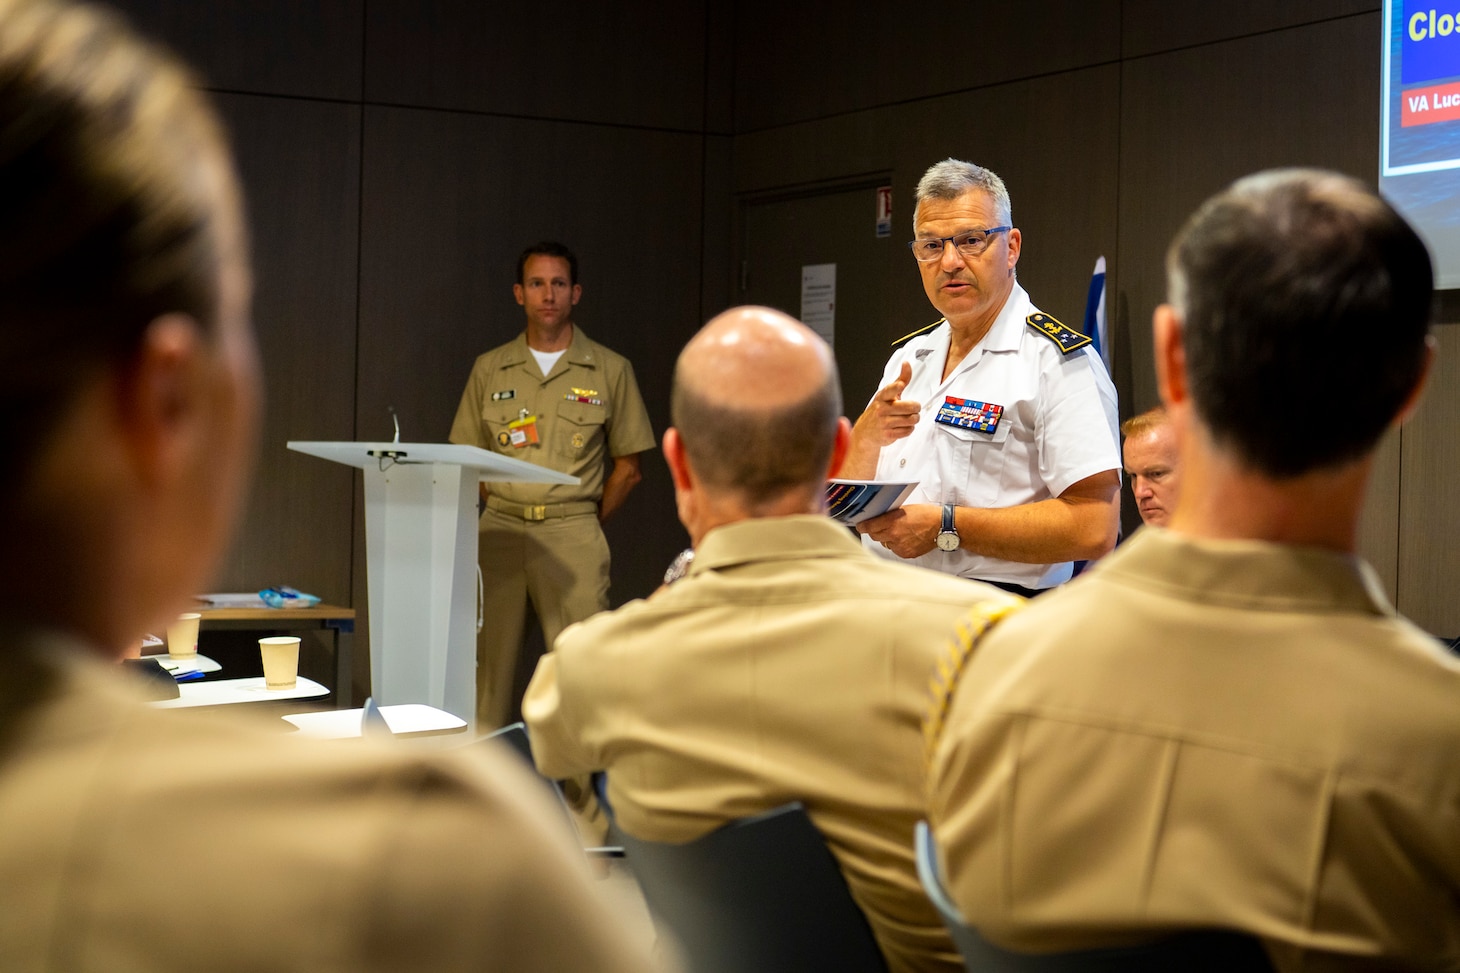 French navy Rear Adm. Christophe Lucas speaks to U.S. Navy Vice Adm. Bill Merz and his staff during the U.S.- France Strategic Dialogue in Paris.